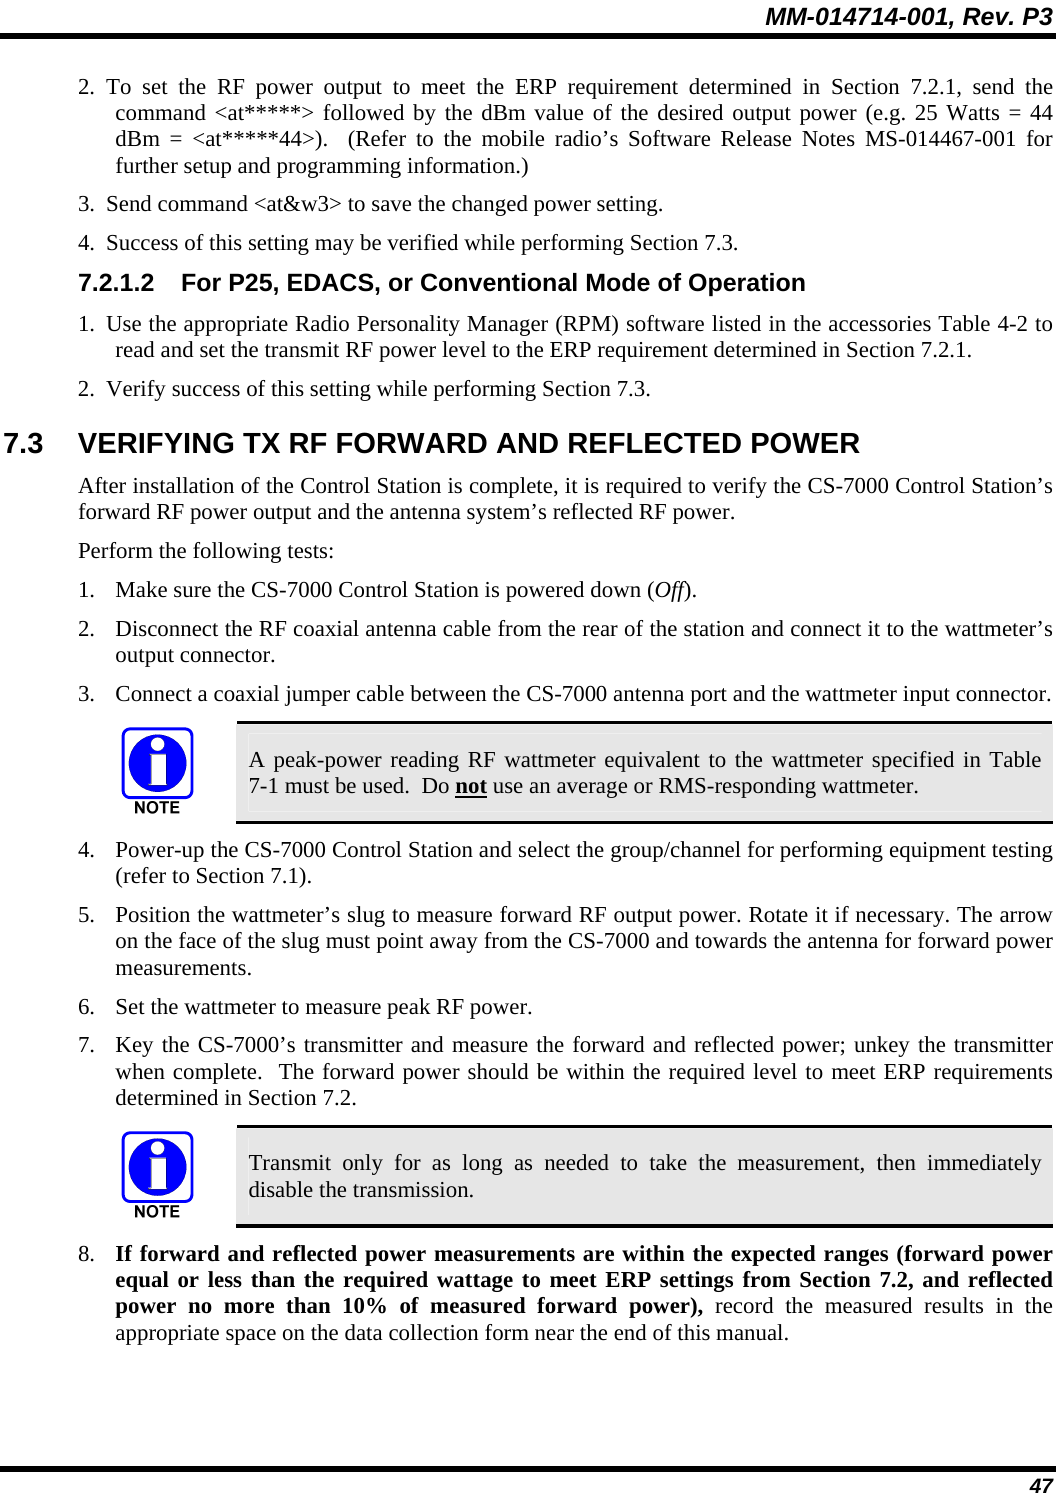 MM-014714-001, Rev. P3 47 2. To set the RF power output to meet the ERP requirement determined in Section 7.2.1, send the command &lt;at*****&gt; followed by the dBm value of the desired output power (e.g. 25 Watts = 44 dBm = &lt;at*****44&gt;).  (Refer to the mobile radio’s Software Release Notes MS-014467-001 for further setup and programming information.) 3. Send command &lt;at&amp;w3&gt; to save the changed power setting. 4. Success of this setting may be verified while performing Section 7.3. 7.2.1.2  For P25, EDACS, or Conventional Mode of Operation 1. Use the appropriate Radio Personality Manager (RPM) software listed in the accessories Table 4-2 to read and set the transmit RF power level to the ERP requirement determined in Section 7.2.1. 2. Verify success of this setting while performing Section 7.3. 7.3  VERIFYING TX RF FORWARD AND REFLECTED POWER After installation of the Control Station is complete, it is required to verify the CS-7000 Control Station’s forward RF power output and the antenna system’s reflected RF power. Perform the following tests: 1. Make sure the CS-7000 Control Station is powered down (Off). 2. Disconnect the RF coaxial antenna cable from the rear of the station and connect it to the wattmeter’s output connector. 3. Connect a coaxial jumper cable between the CS-7000 antenna port and the wattmeter input connector.   A peak-power reading RF wattmeter equivalent to the wattmeter specified in Table 7-1 must be used.  Do not use an average or RMS-responding wattmeter. 4. Power-up the CS-7000 Control Station and select the group/channel for performing equipment testing (refer to Section 7.1). 5. Position the wattmeter’s slug to measure forward RF output power. Rotate it if necessary. The arrow on the face of the slug must point away from the CS-7000 and towards the antenna for forward power measurements. 6. Set the wattmeter to measure peak RF power. 7. Key the CS-7000’s transmitter and measure the forward and reflected power; unkey the transmitter when complete.  The forward power should be within the required level to meet ERP requirements determined in Section 7.2.   Transmit only for as long as needed to take the measurement, then immediately disable the transmission. 8. If forward and reflected power measurements are within the expected ranges (forward power equal or less than the required wattage to meet ERP settings from Section 7.2, and reflected power no more than 10% of measured forward power), record the measured results in the appropriate space on the data collection form near the end of this manual. 